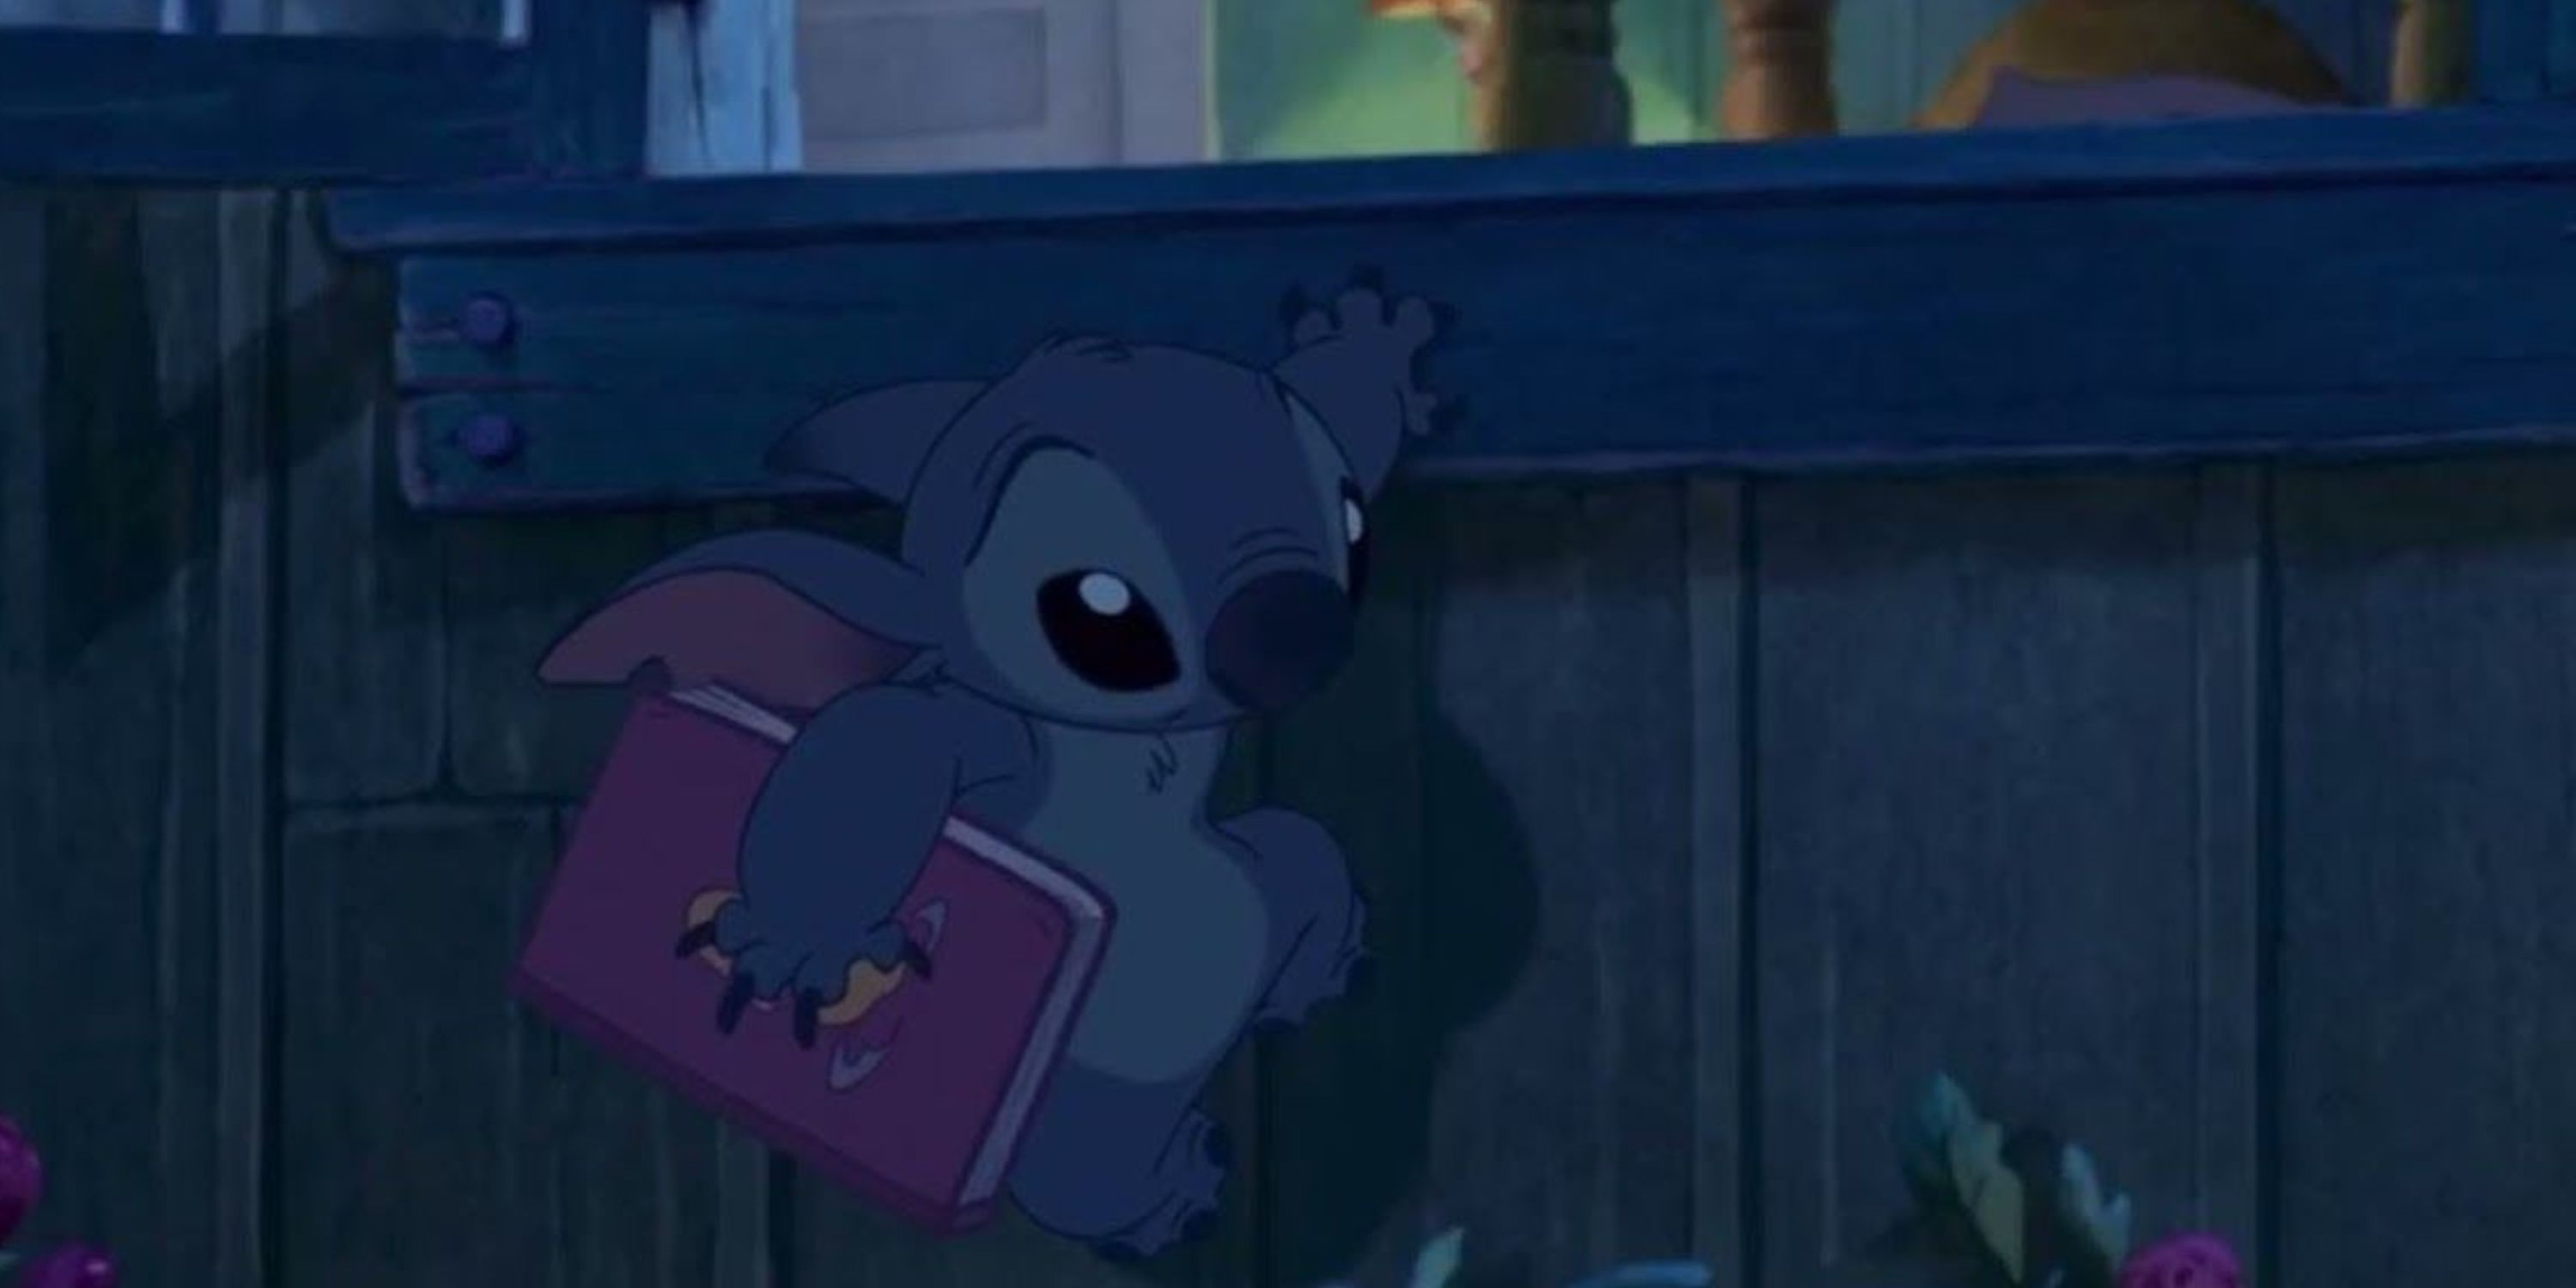 Stitch climbing out of the window in Lilo and Stitch (2002)